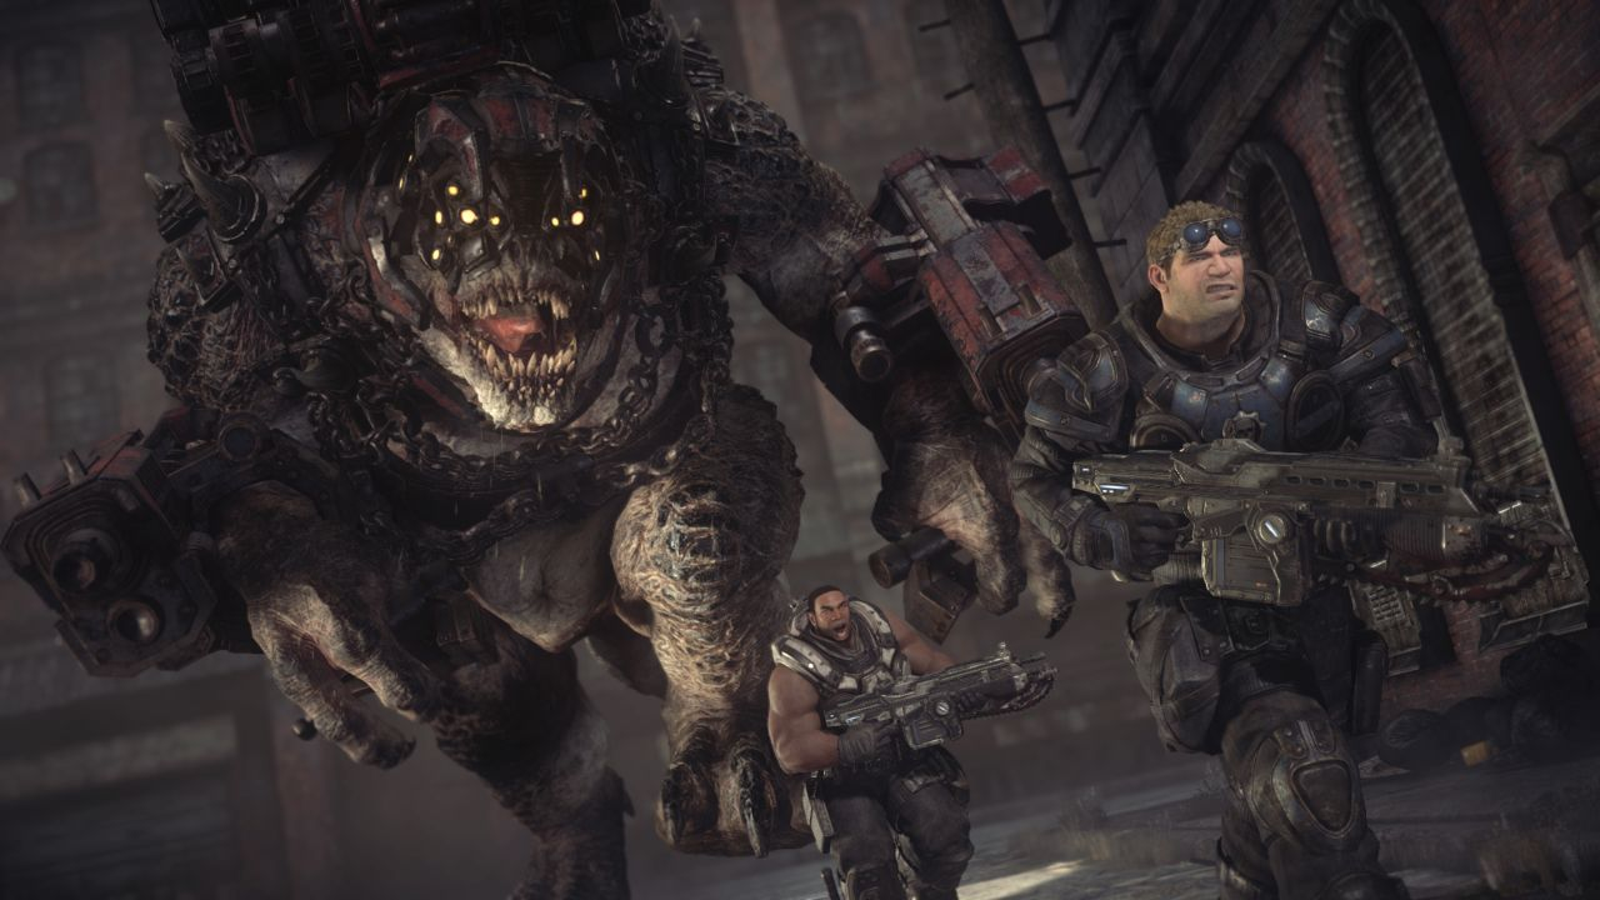 Buy Gears of War Remastered Collection Other